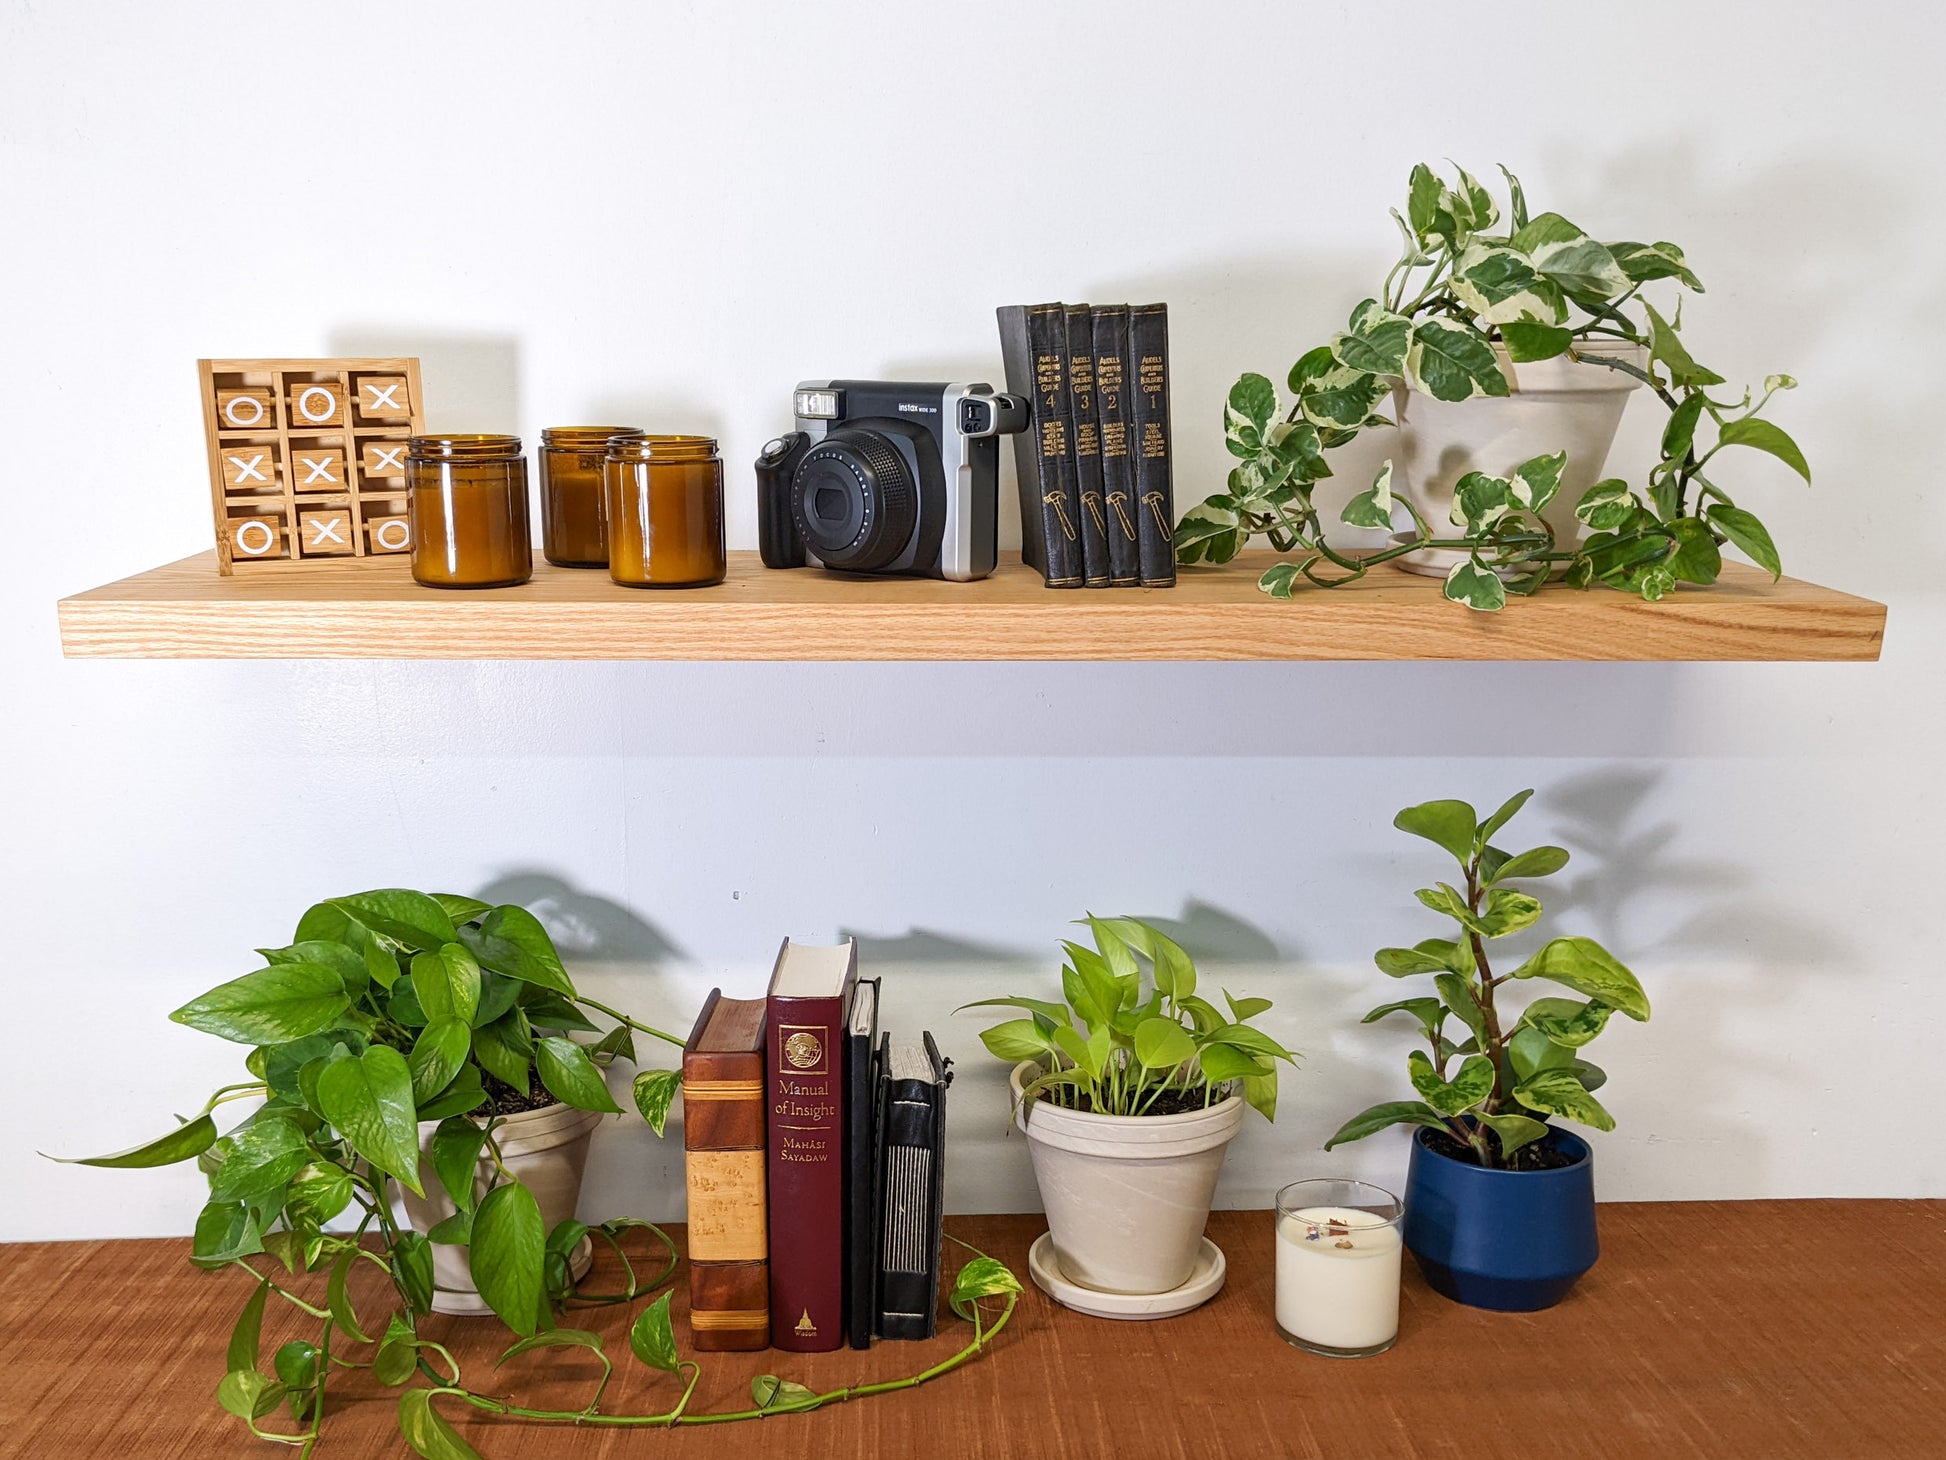 The front view of a medium oak floating shelf. On top, four black leather bound books are displayed, next to three vintage candles, and a birds nest fern that sits within a wood round planter.